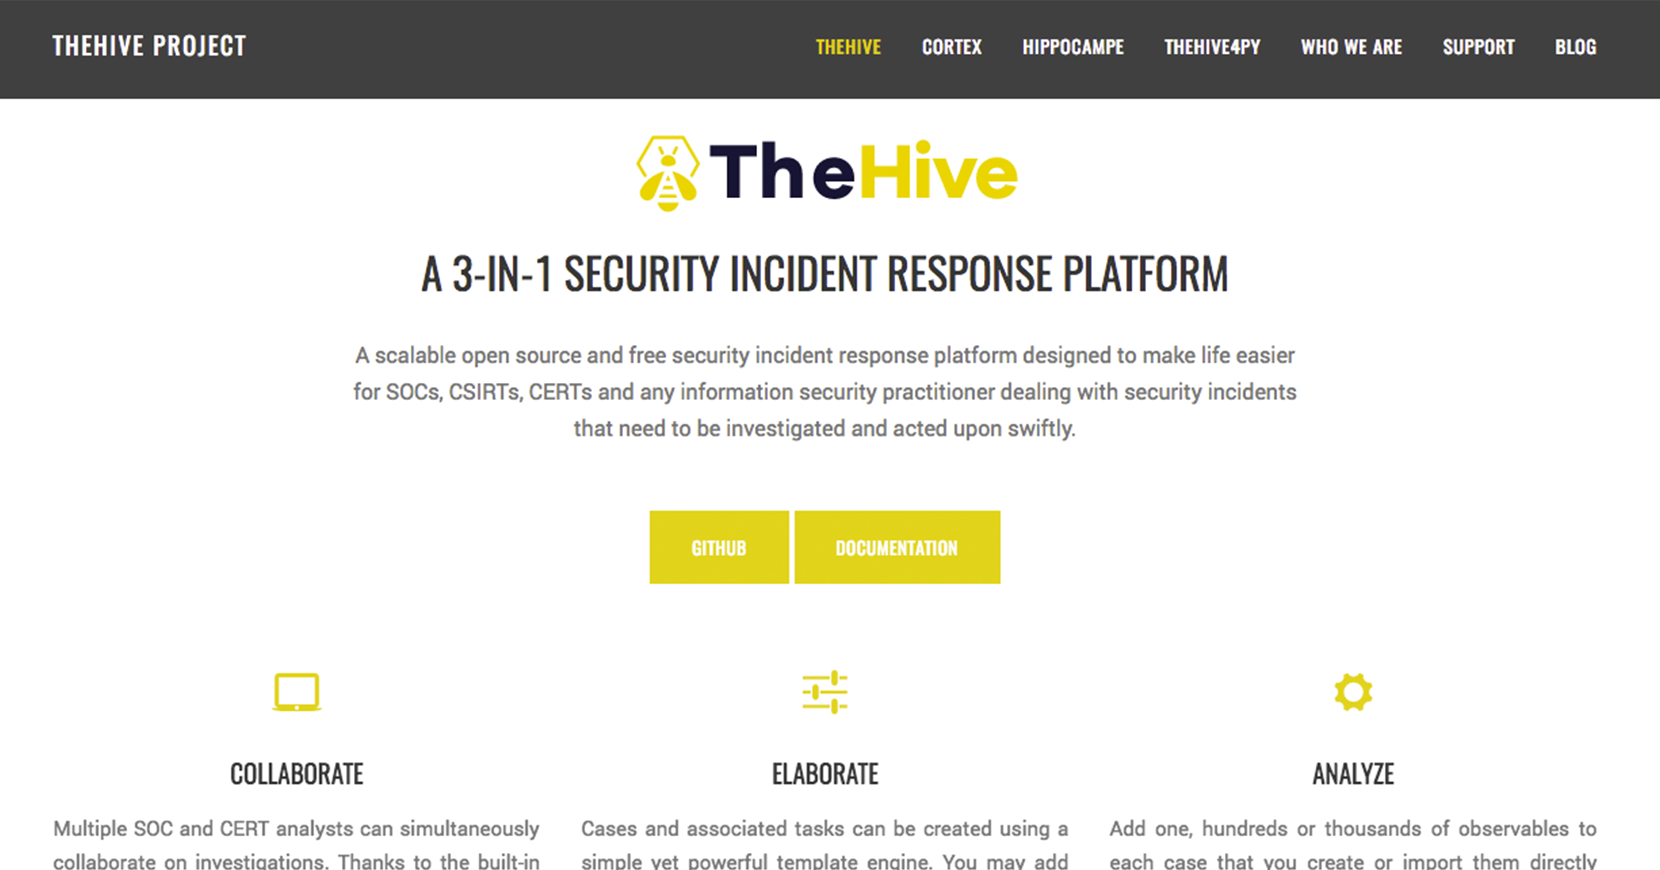 CTI Project: Using a Discord as a Threat Intelligence Dashboard